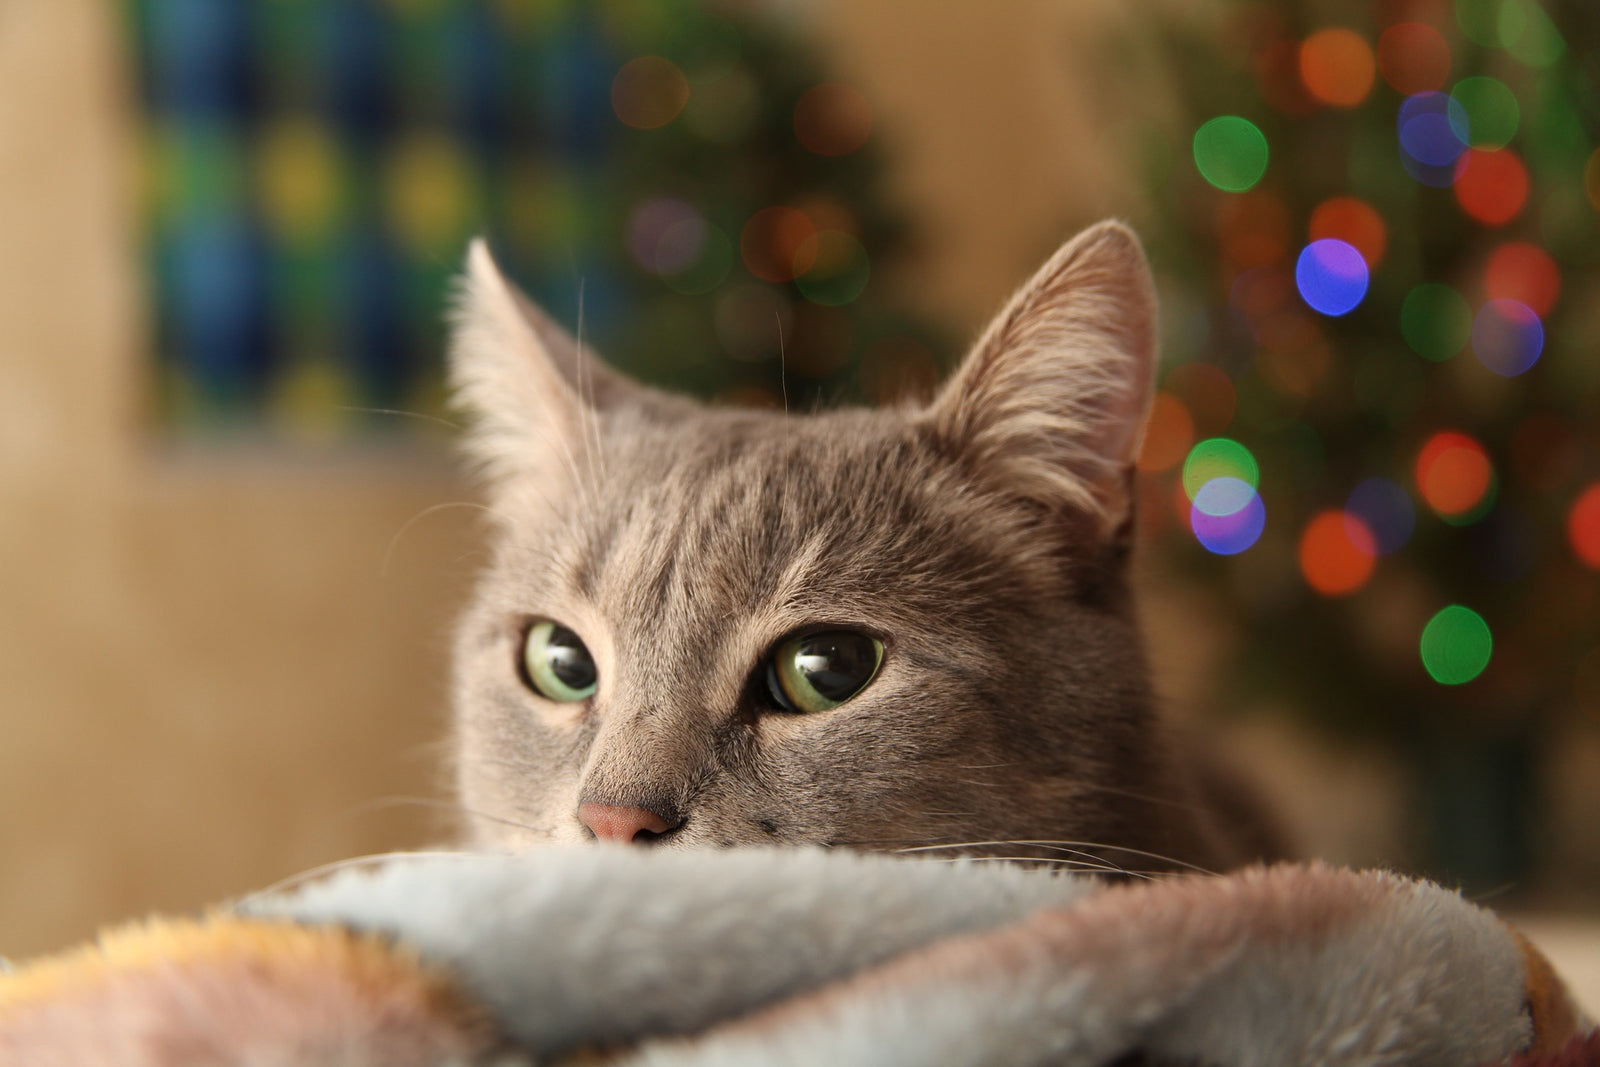 Tips for Keeping the Cat Out of the Christmas Tree